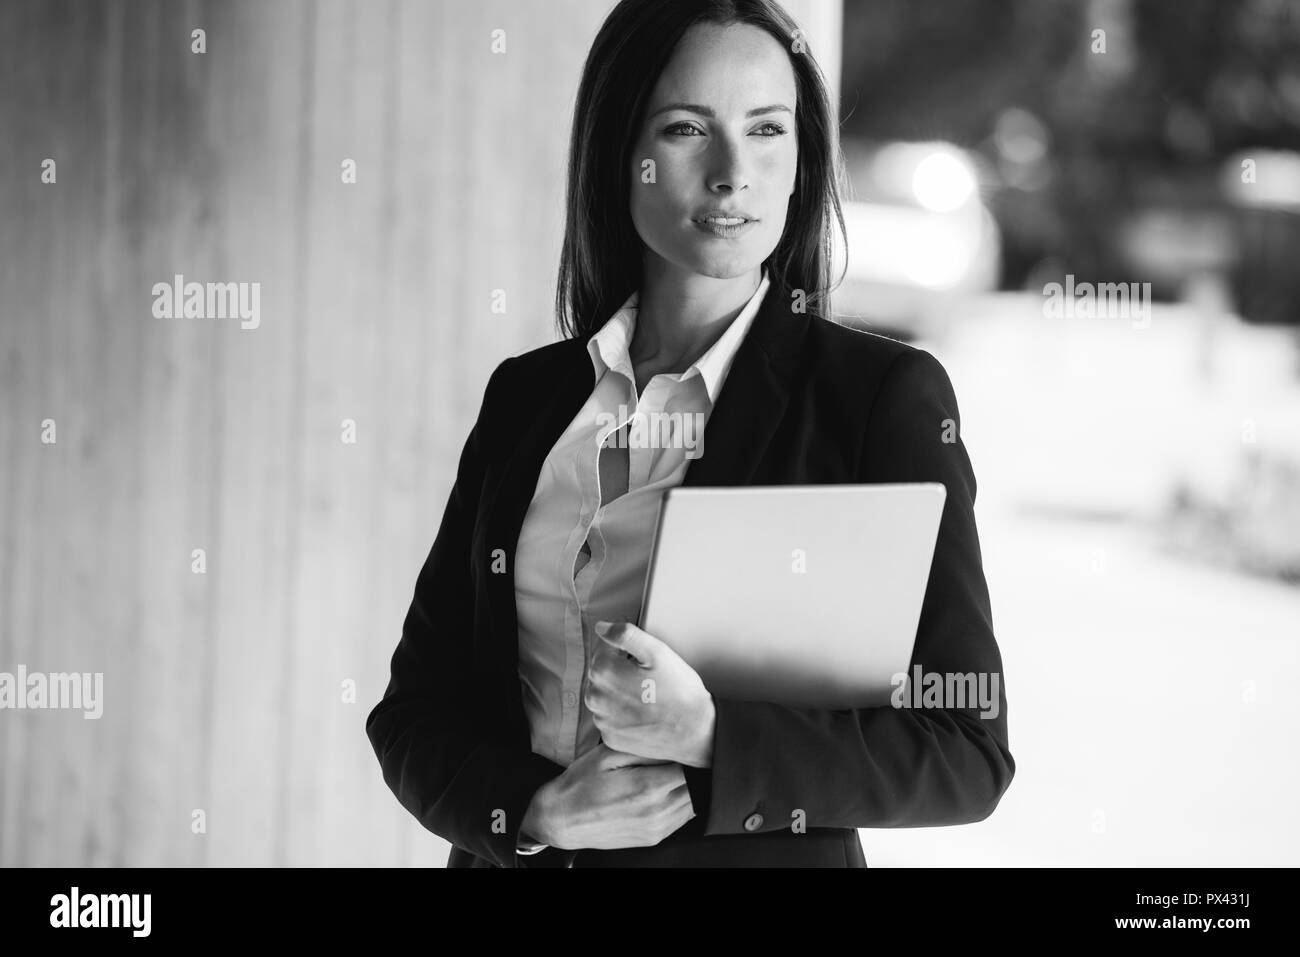 Business woman with crossed arms smiling. With copy space. Stock Photo